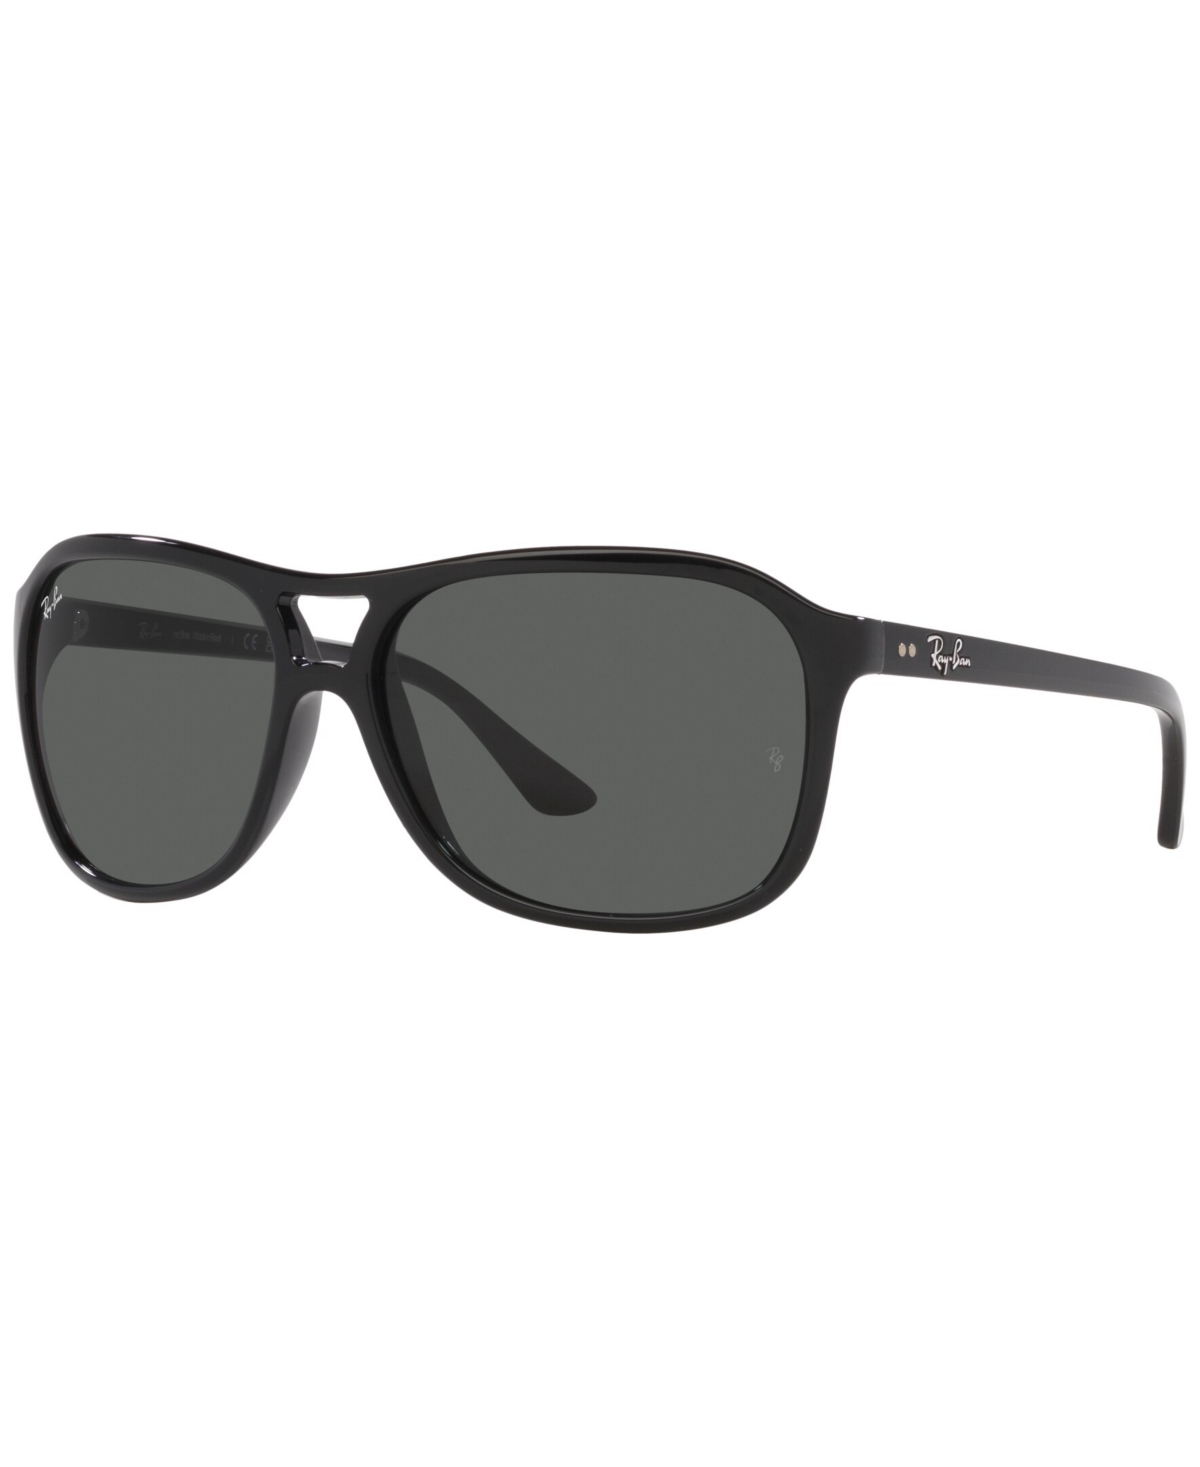 Ray Ban Unisex Sunglasses, Rb4128 In Black